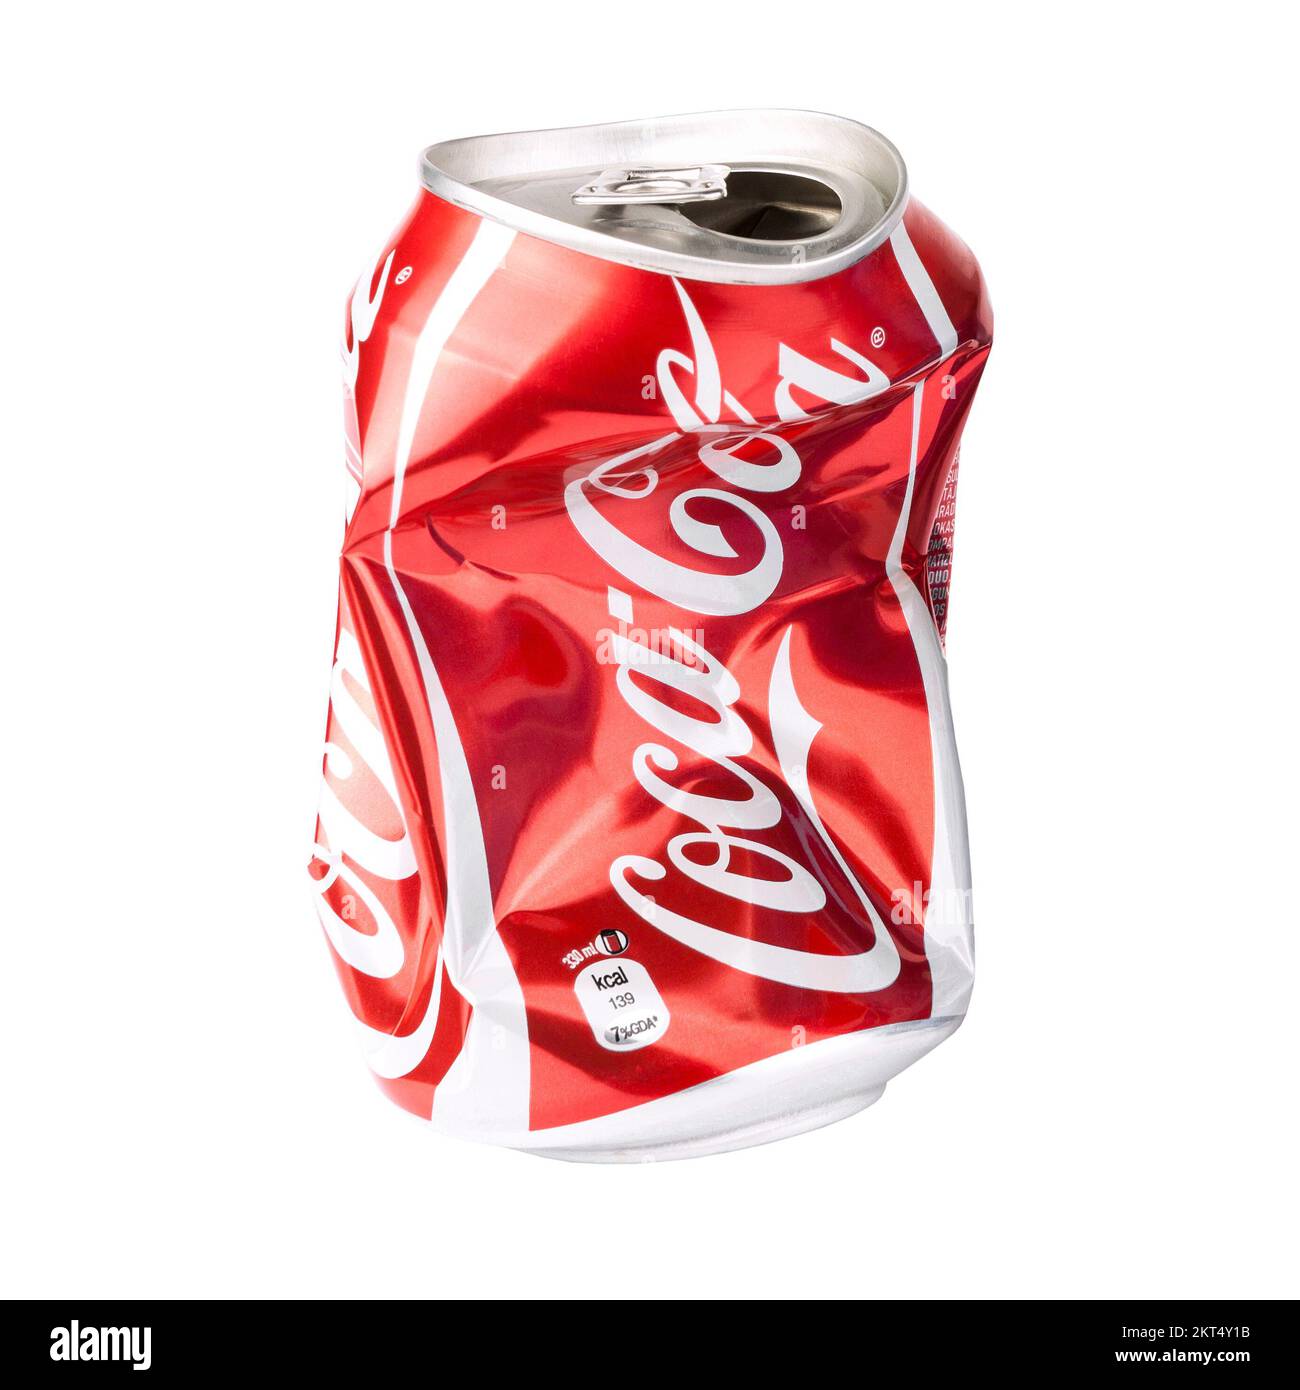 Crushed Coca Cola 330 ml can, isolated on white background, front view close up studio shot Stock Photo